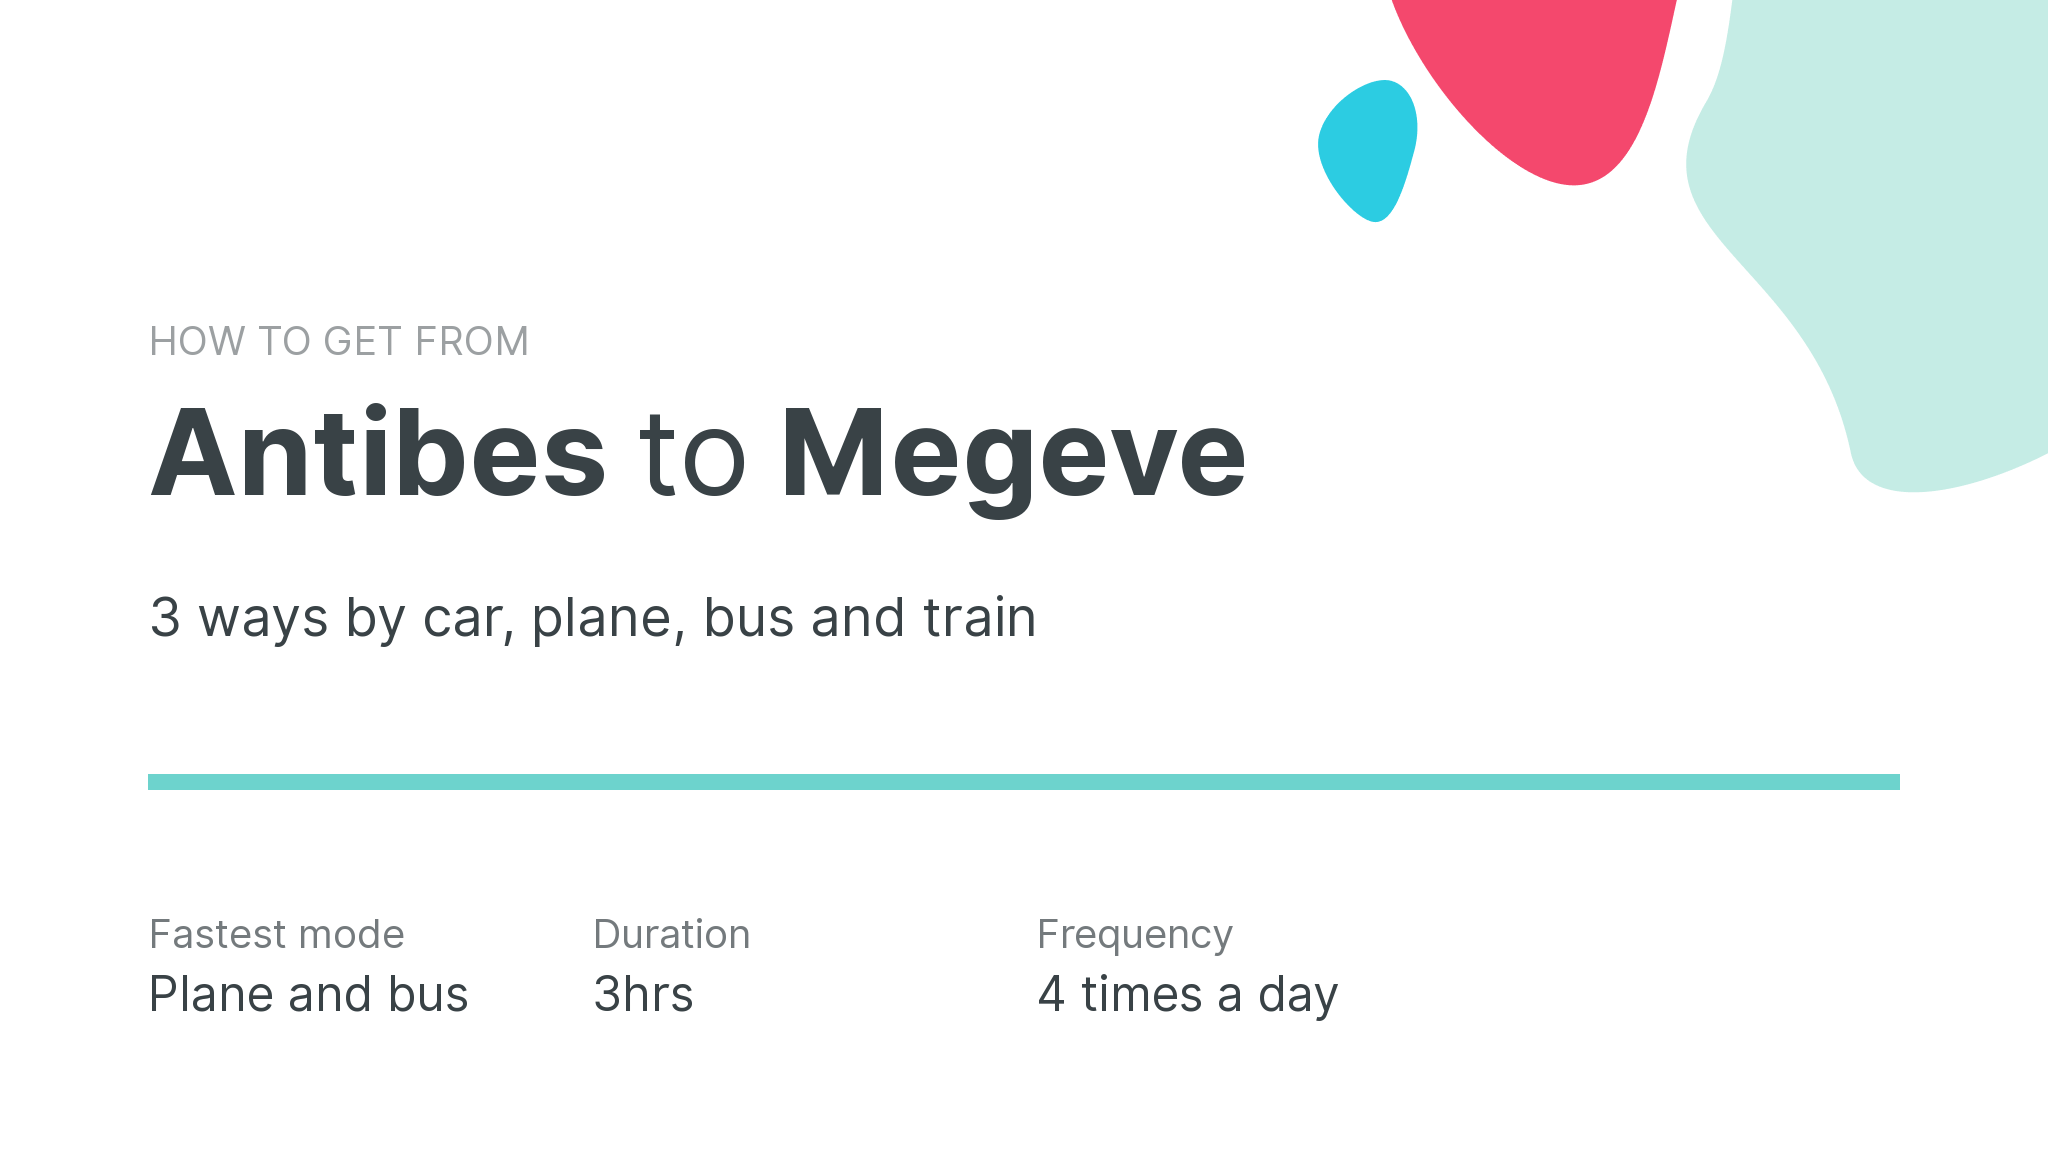 How do I get from Antibes to Megeve